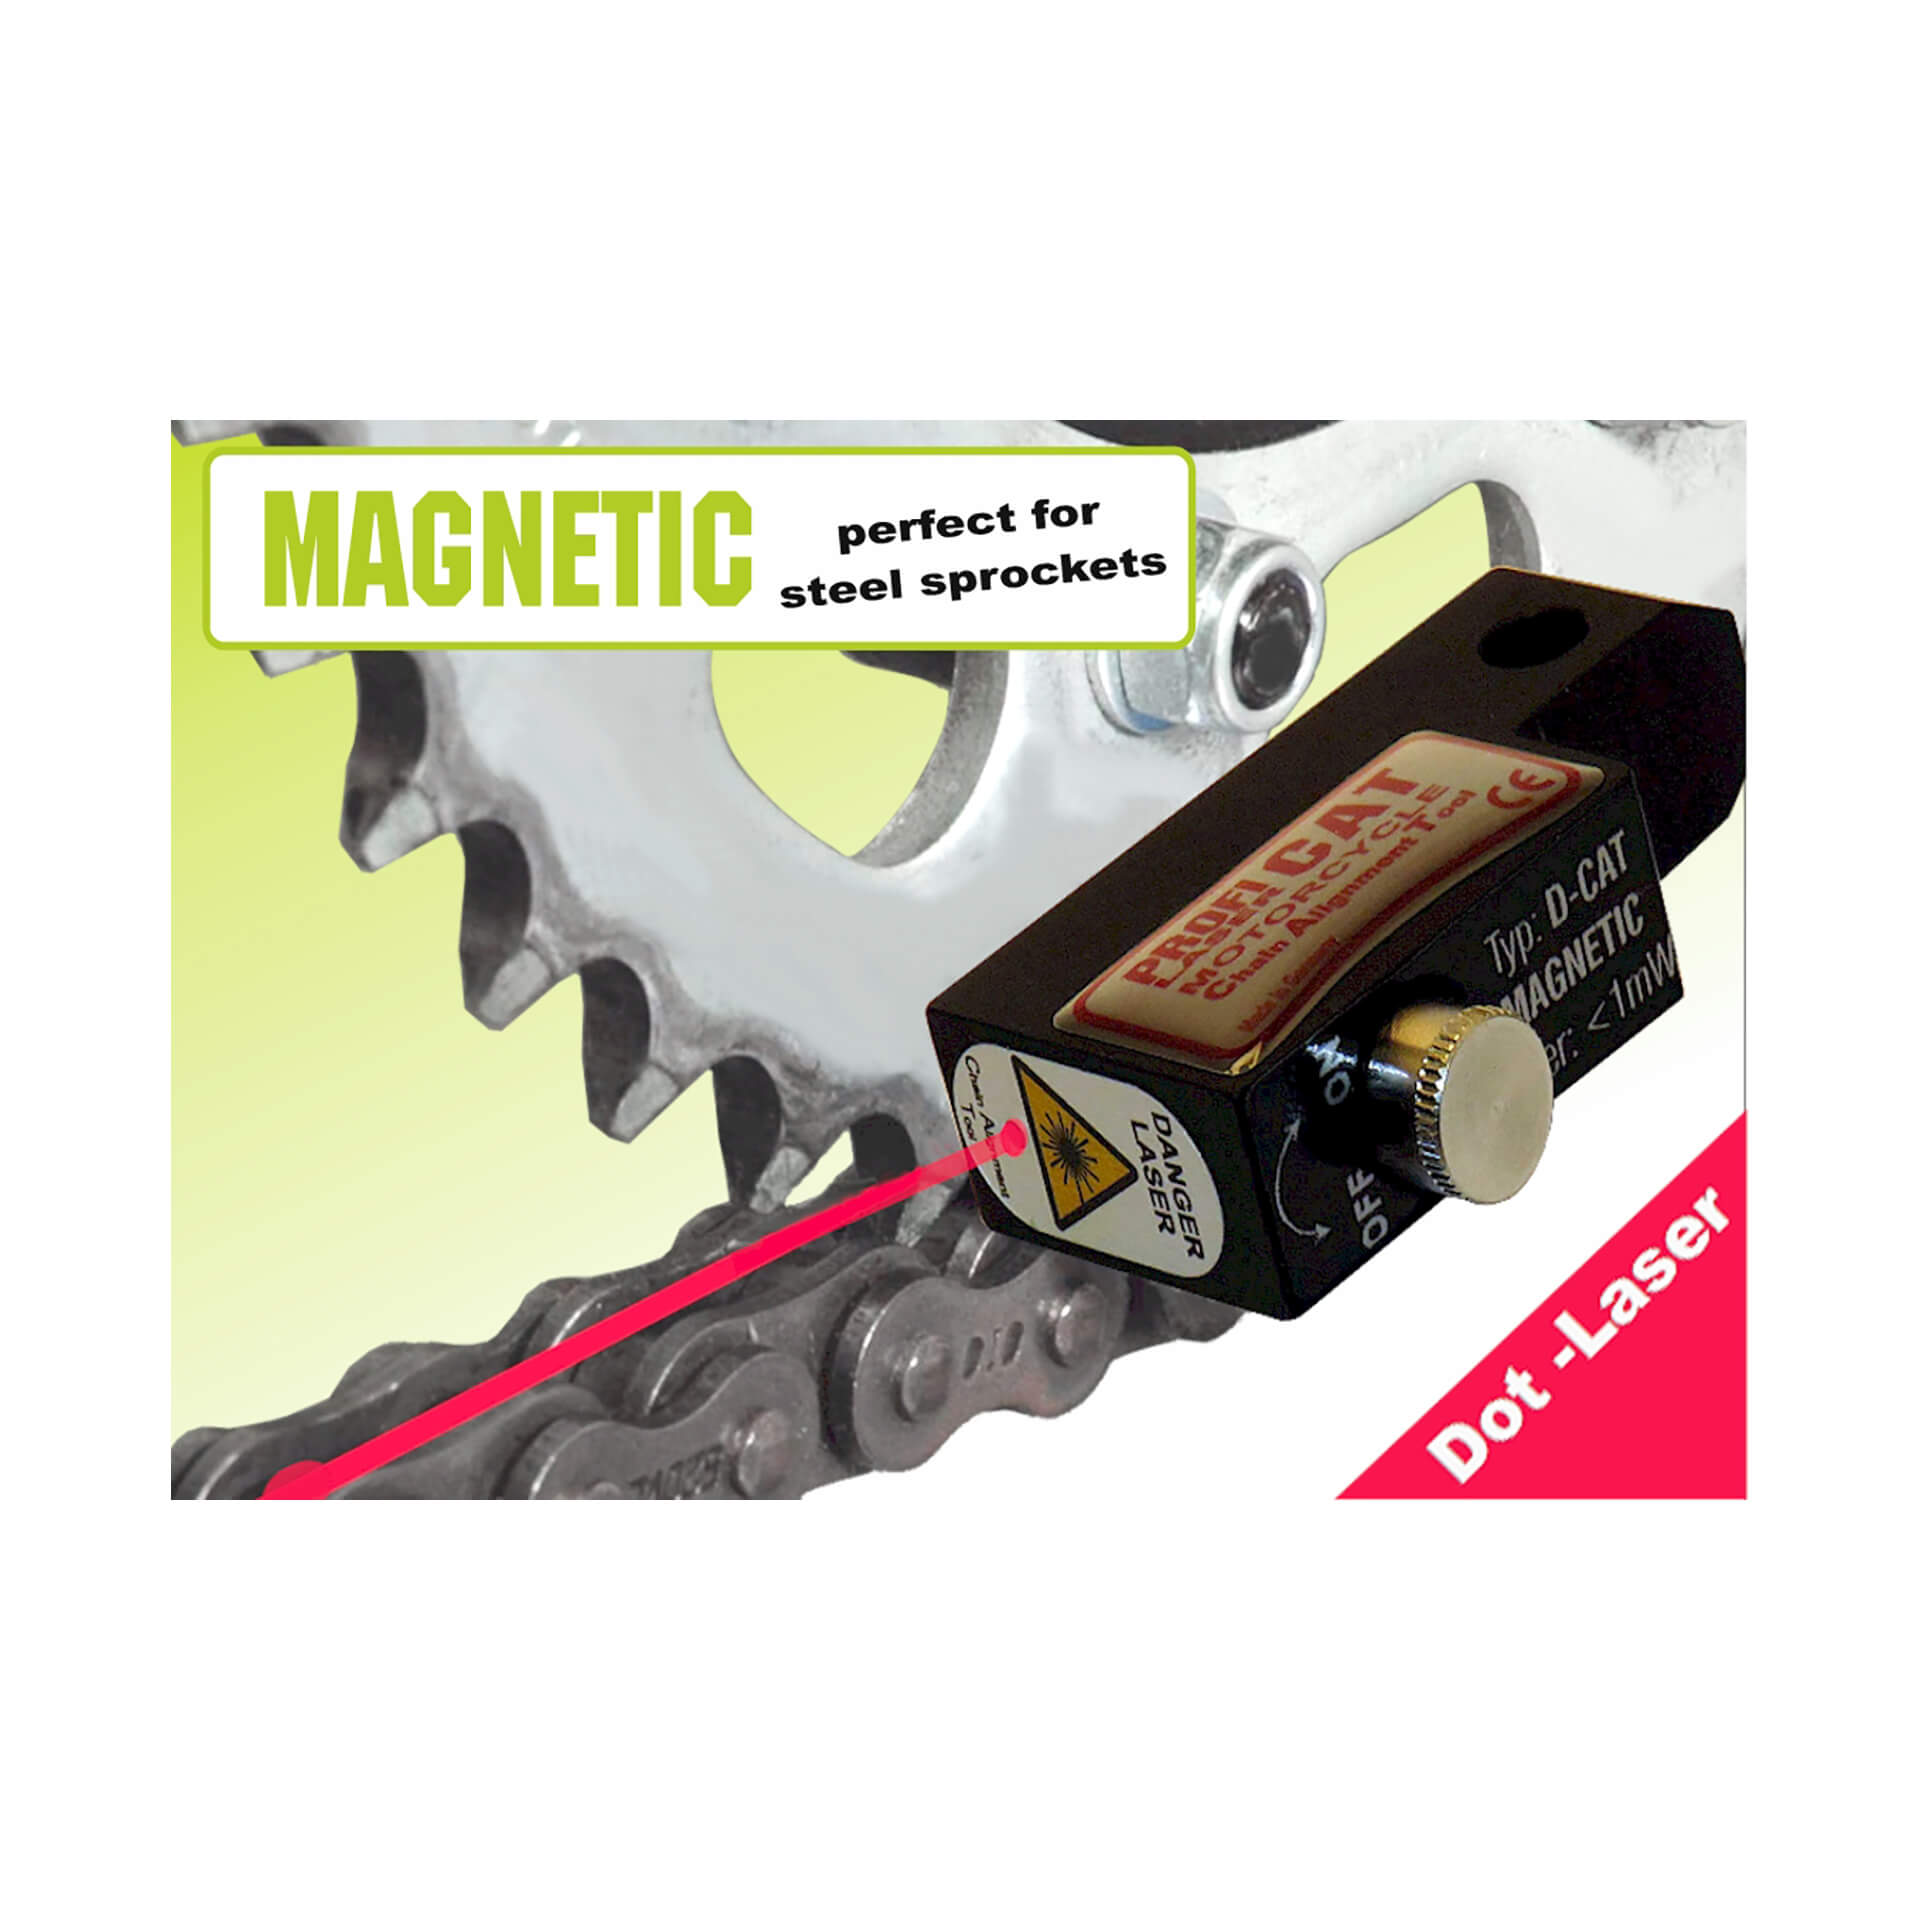 profi_product D-CAT - magnetic for steel sprockets